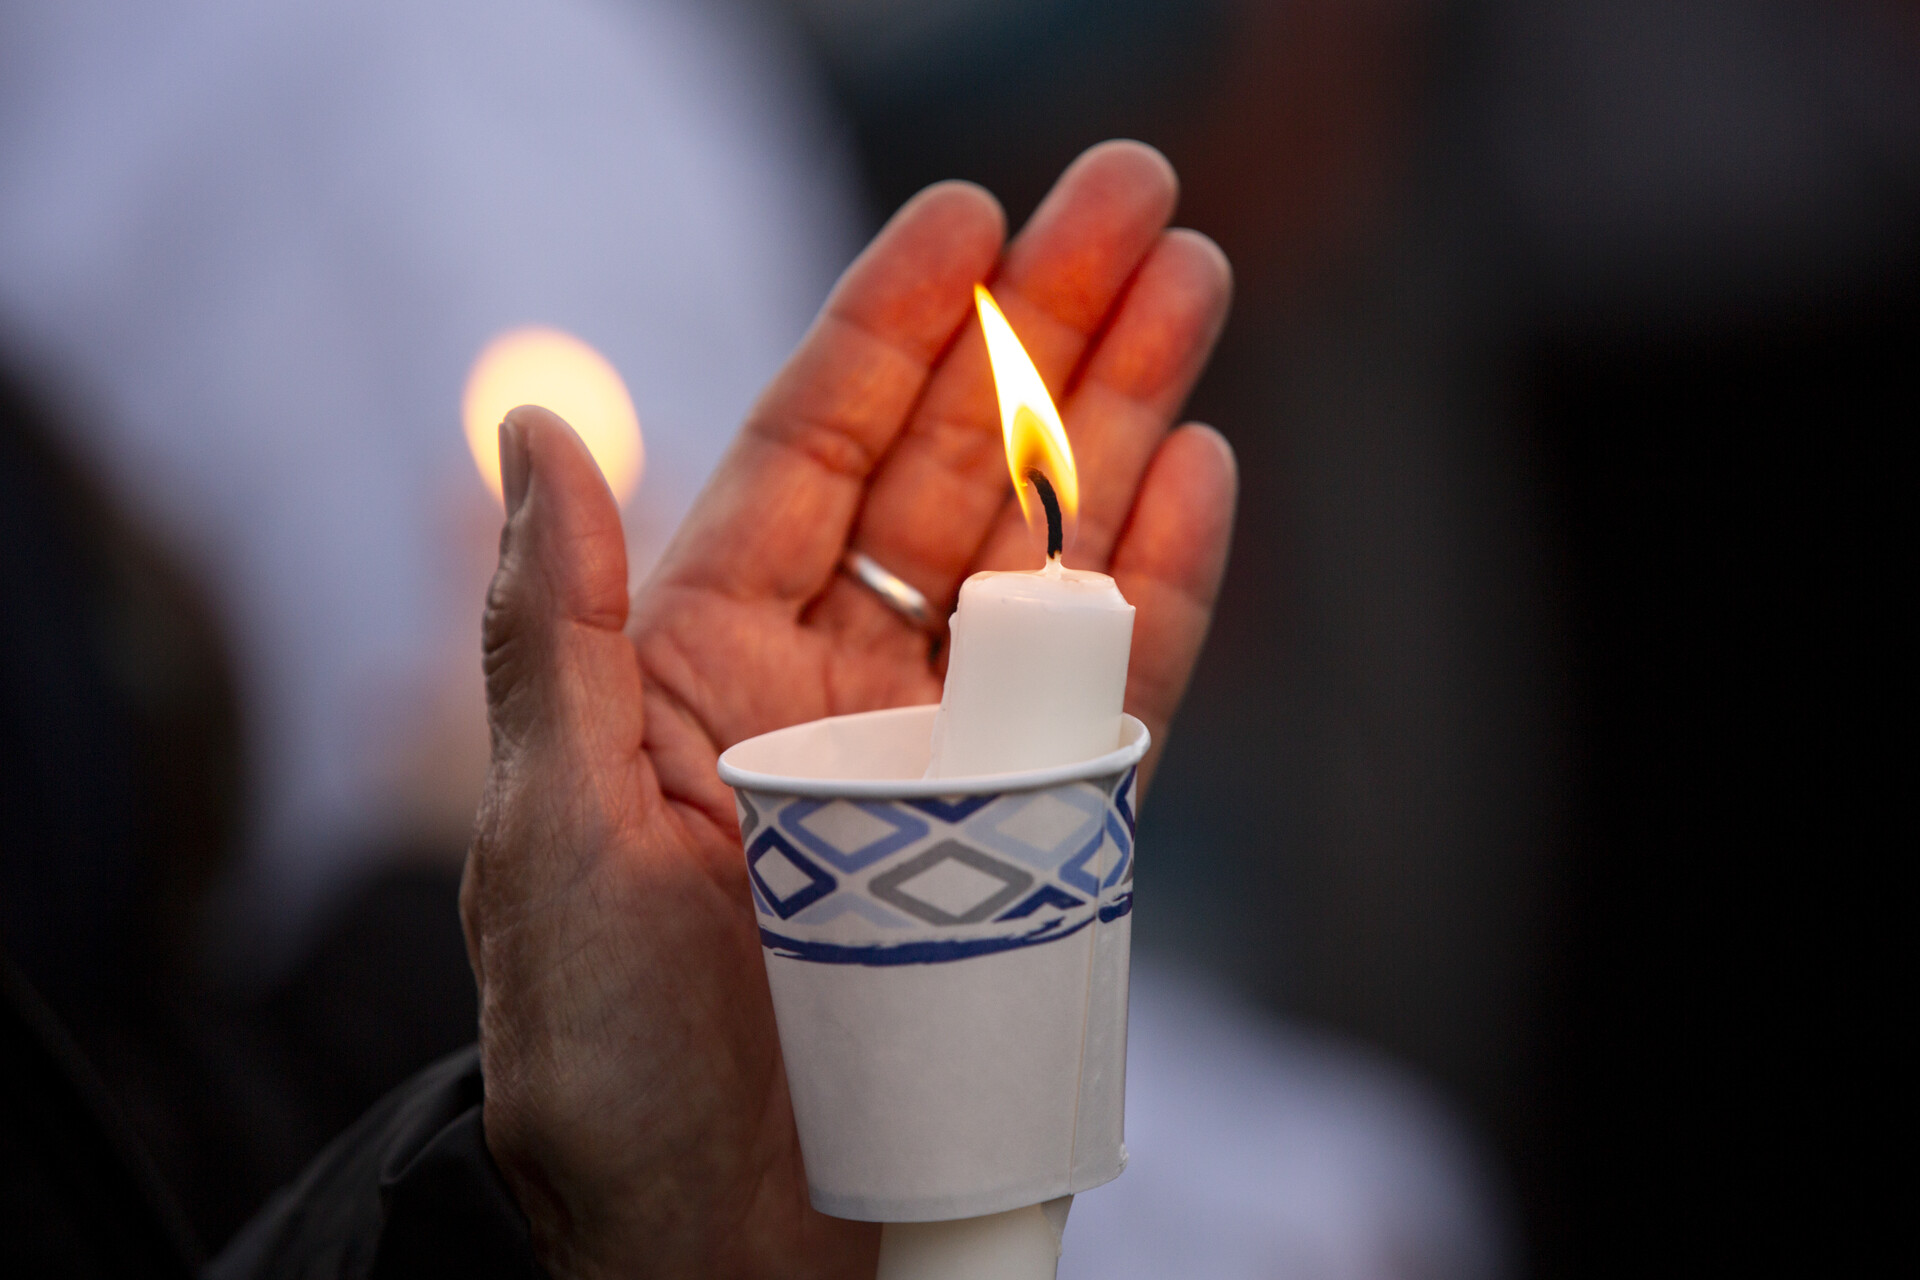 A hand hovers over a lit candle that is inside a paper cup.